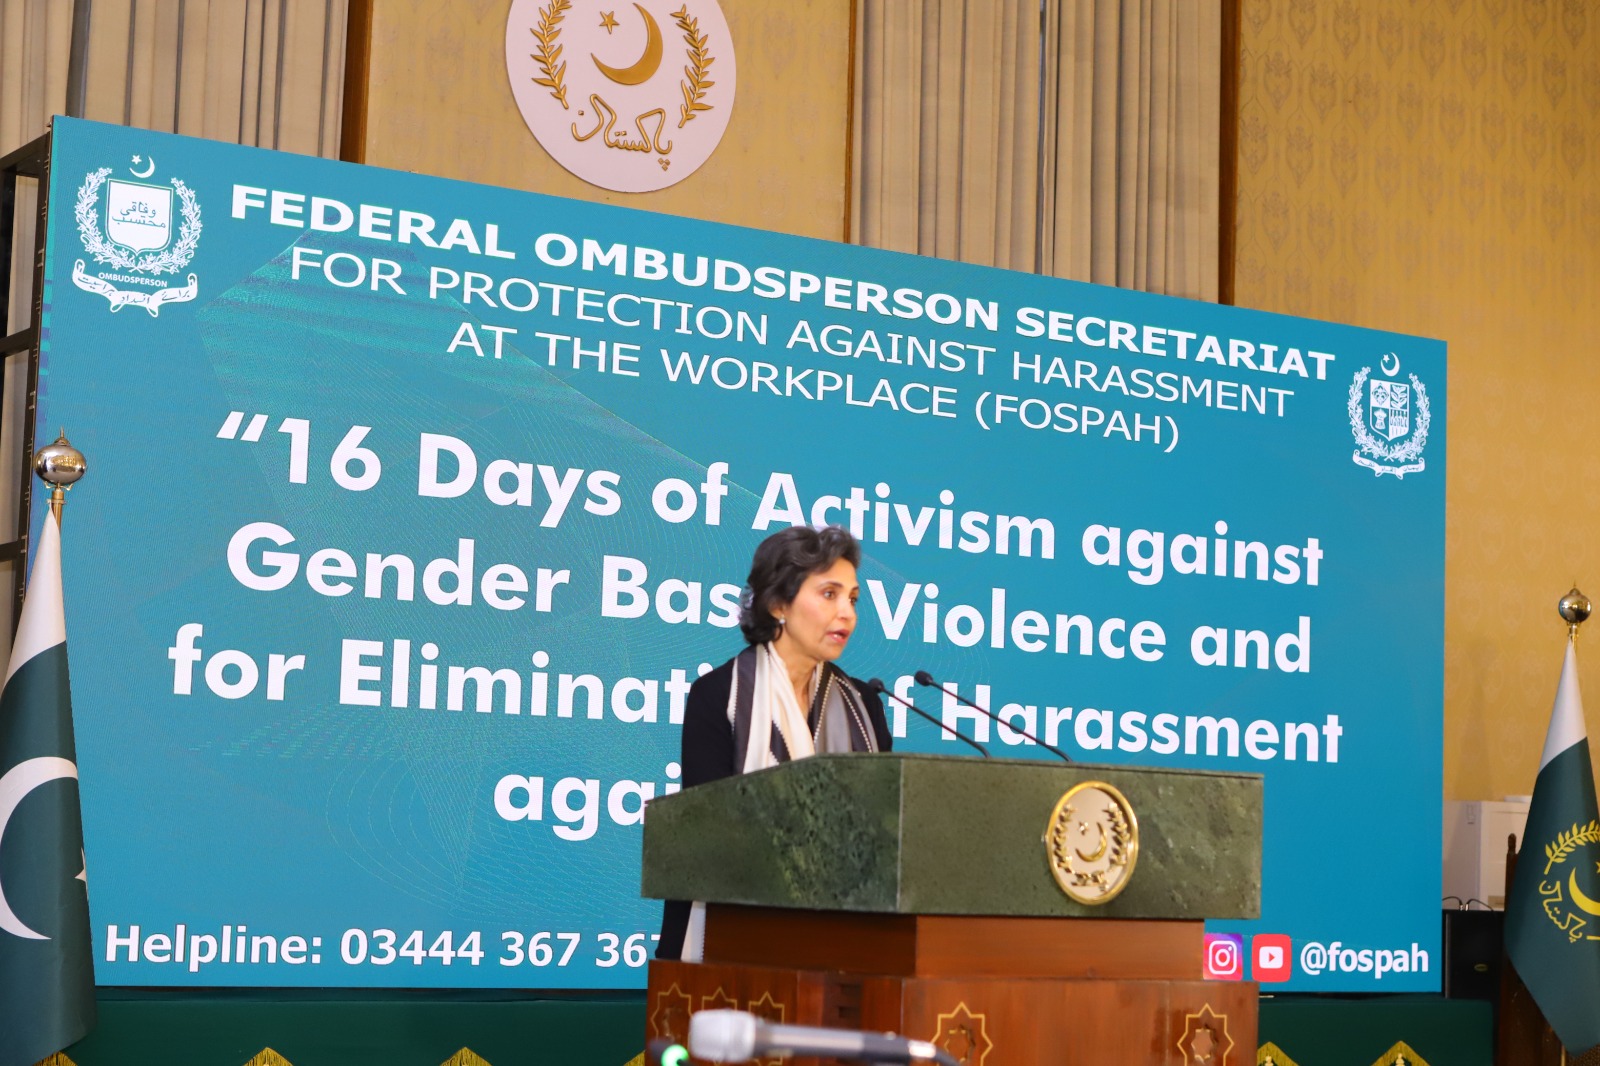 Federal Ombudsperson Secretariat for Protection against Harassment (FOSPAH) organized an awareness event at the President House